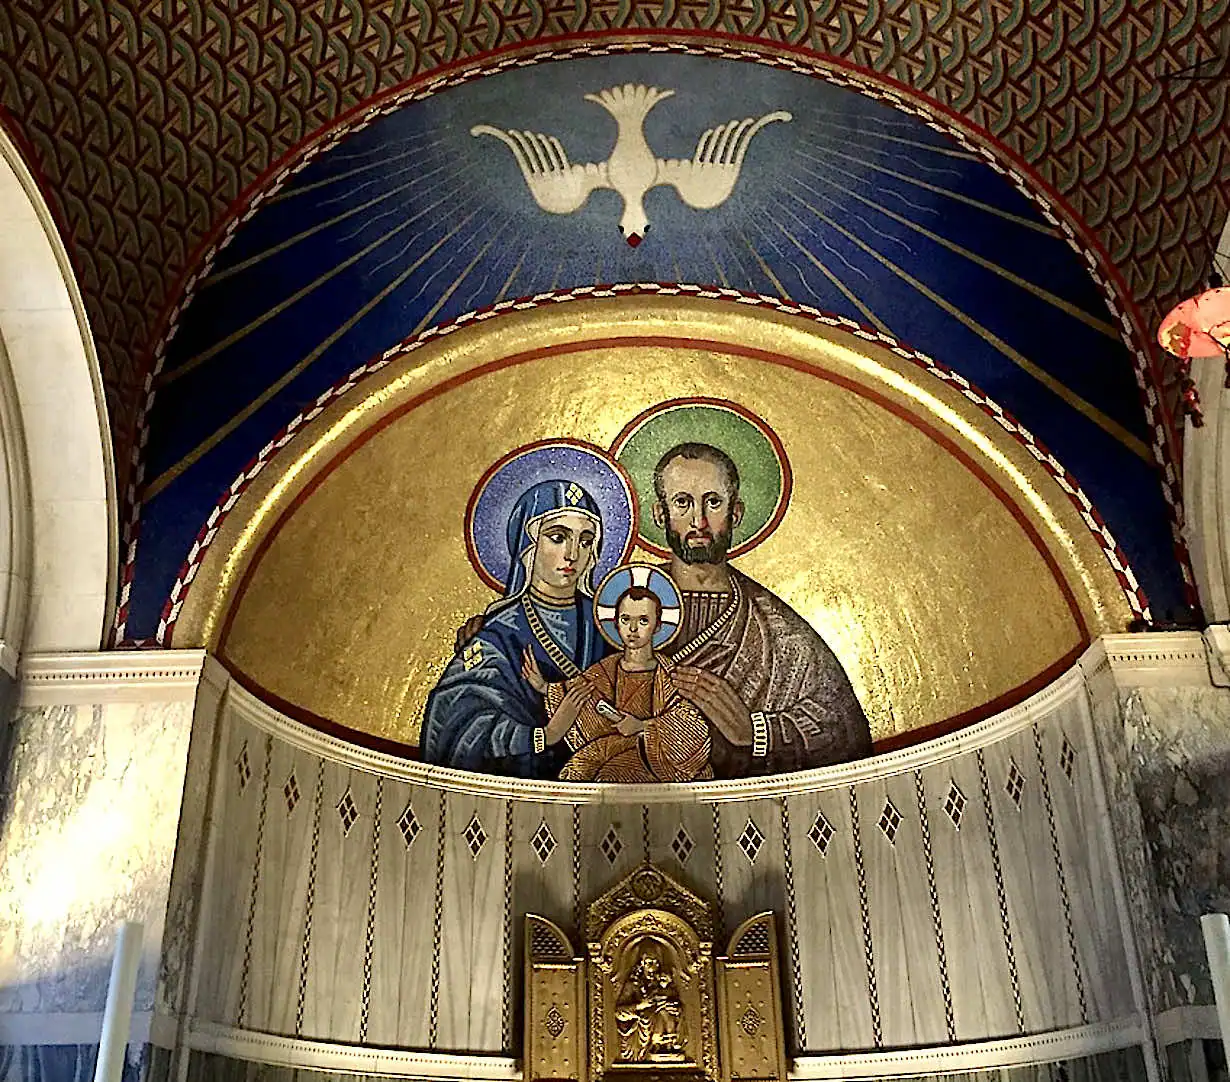 Gold mosaic in the Chapel of St. Joseph